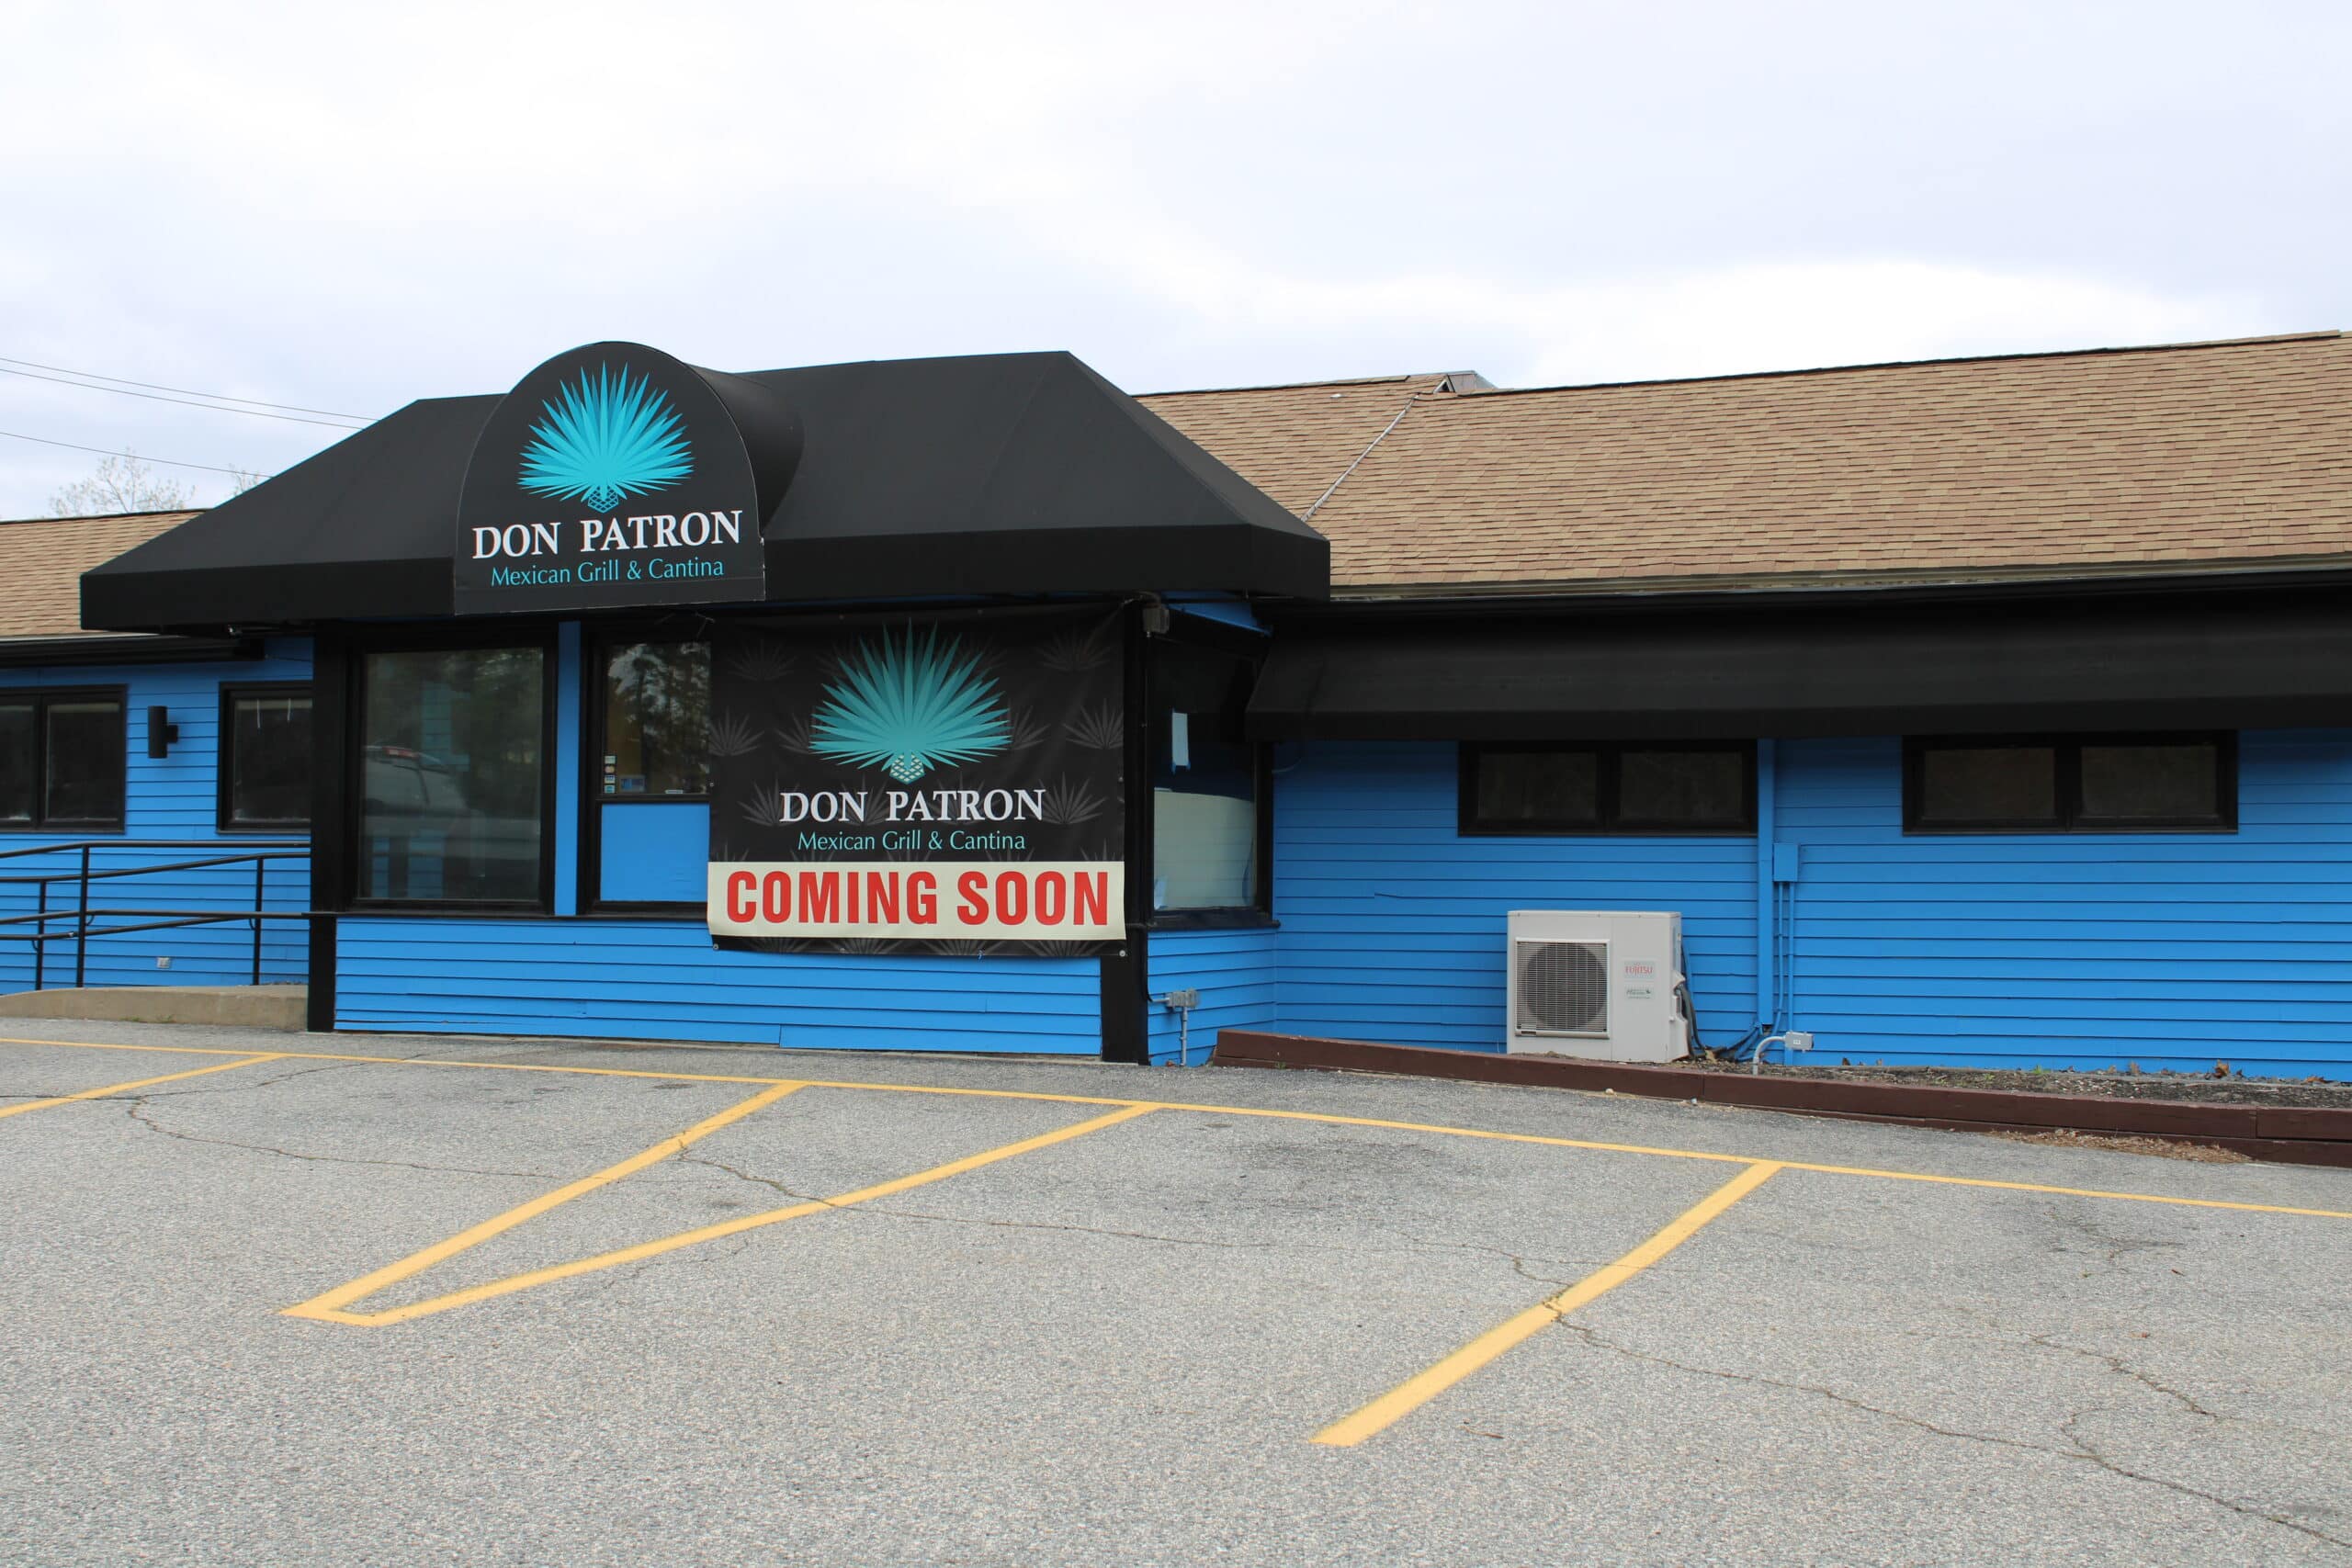 Don Patron to open at site of former Halfway Cafe